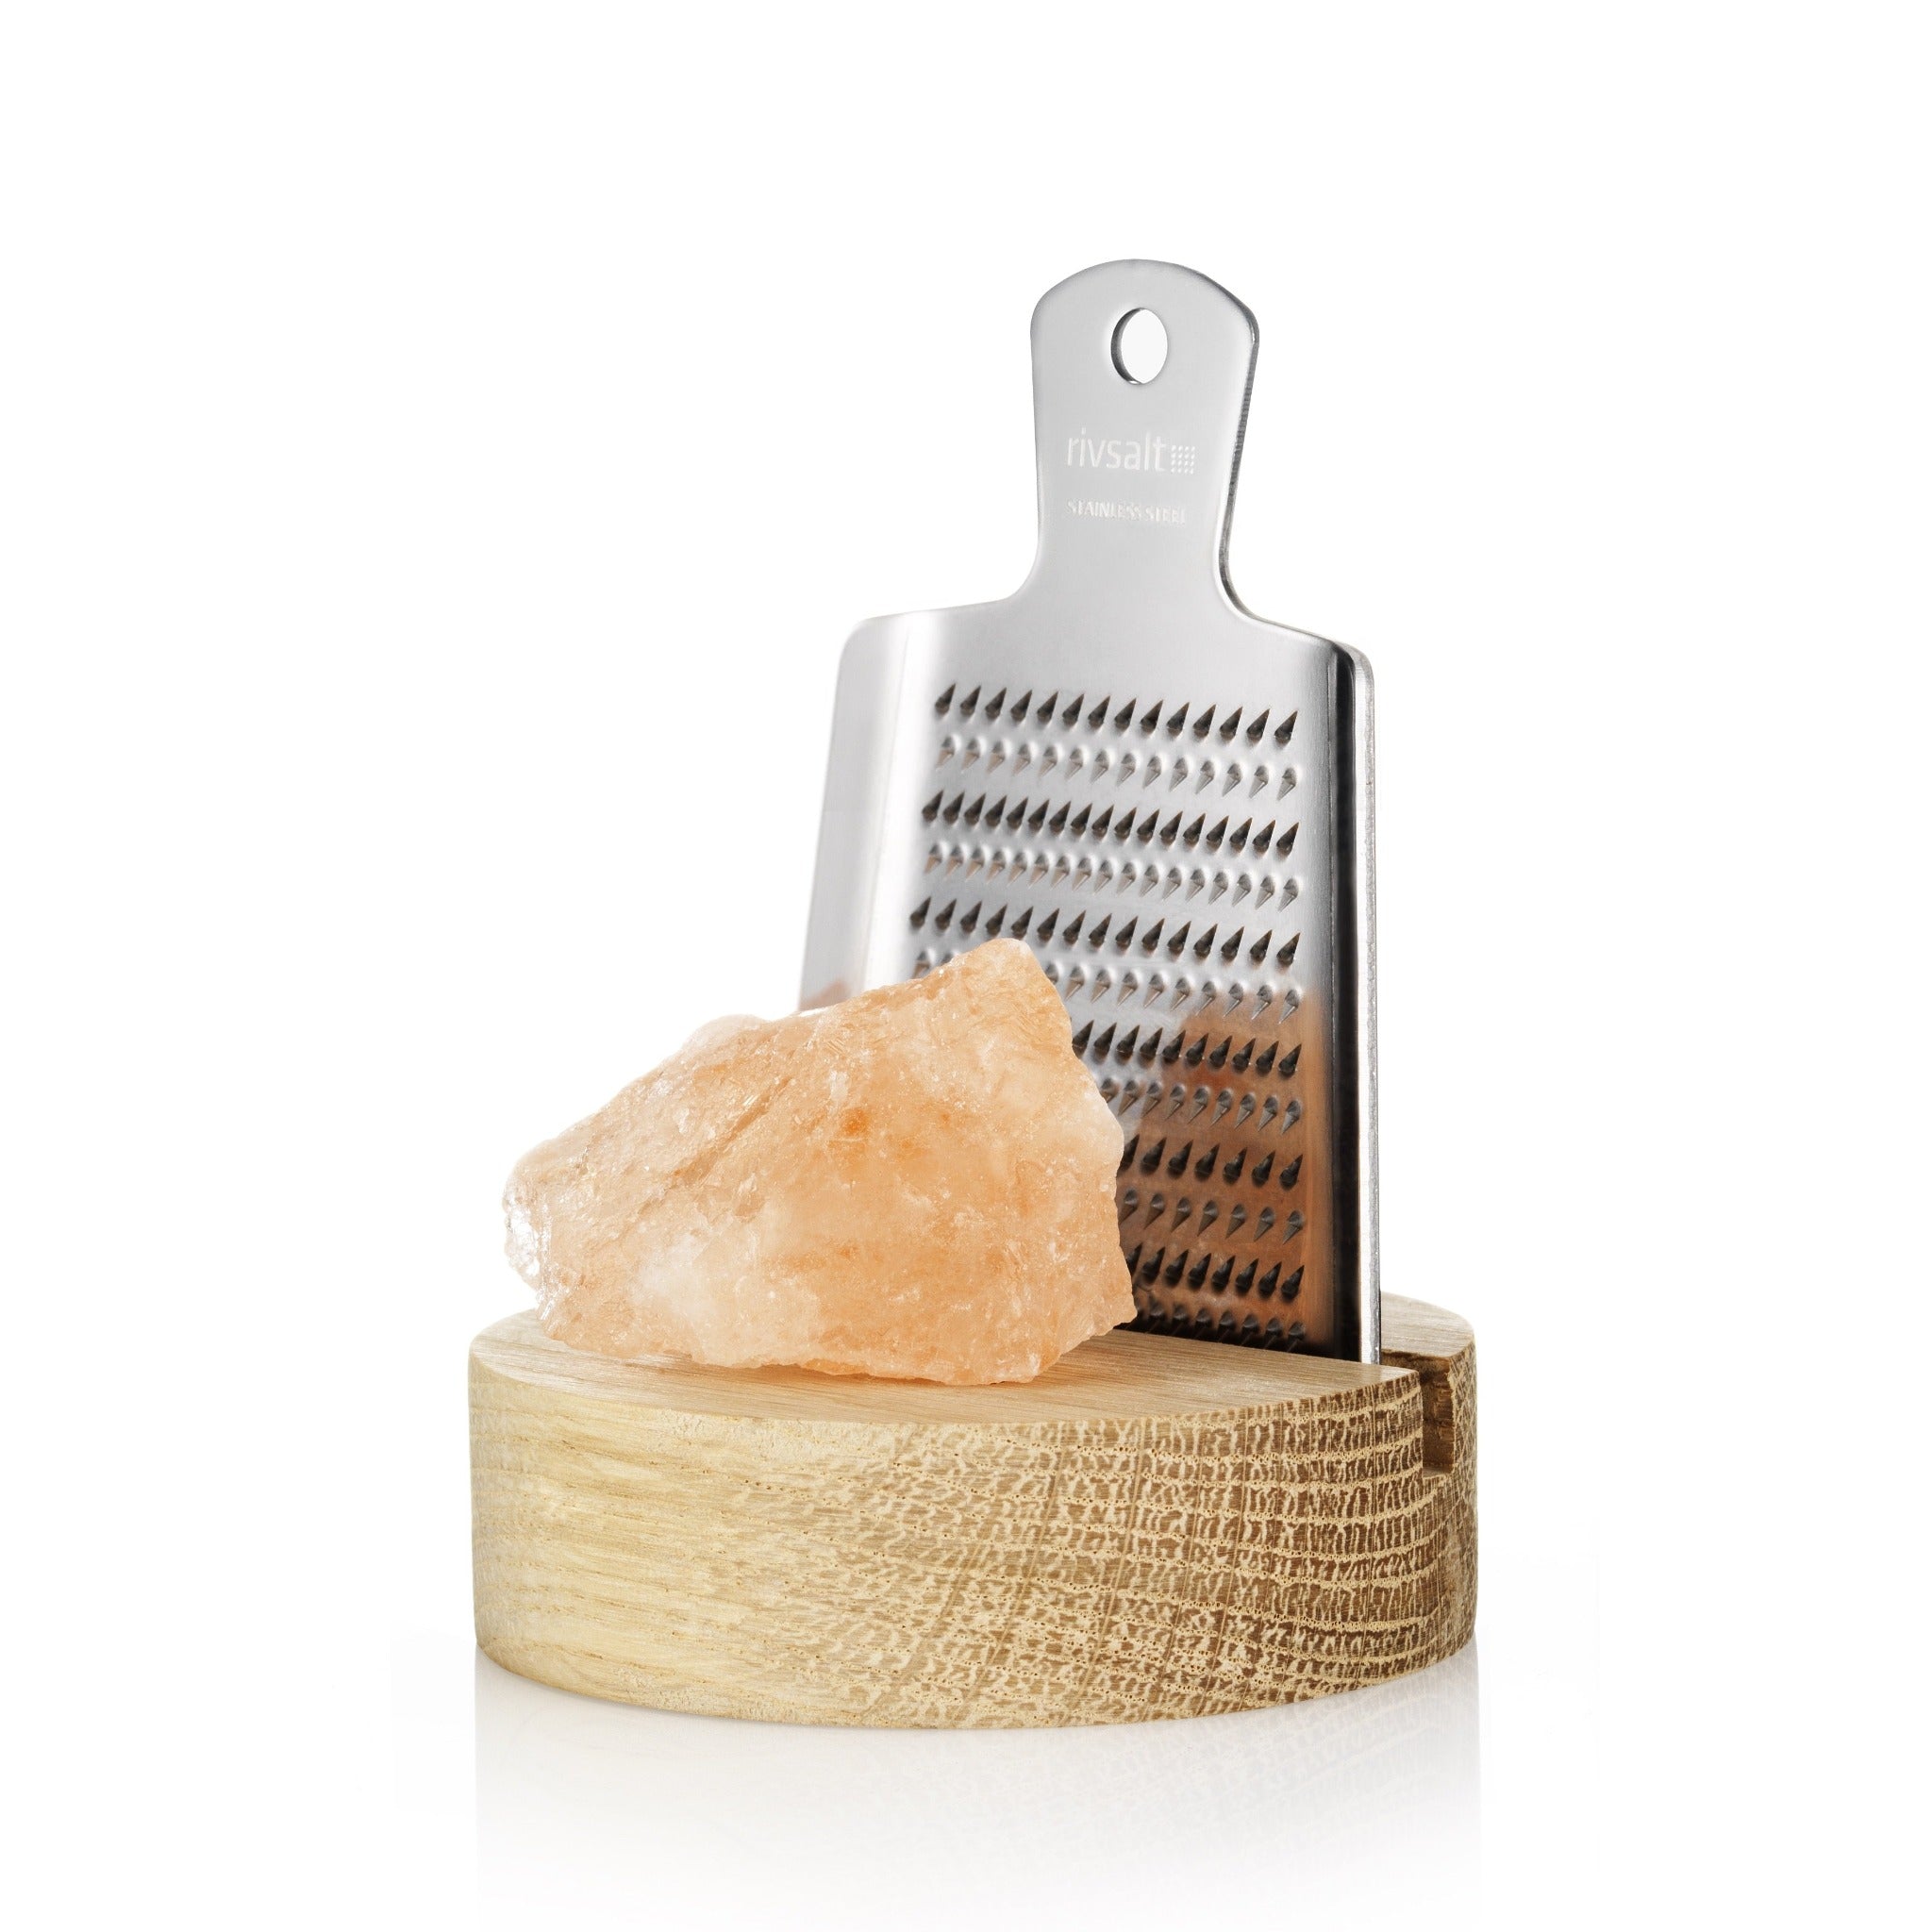 001 RIVSALT [THE ORIGINAL] - stainless steel grater. stand in natural wood. himalayan salt rock. stylish gift pack.